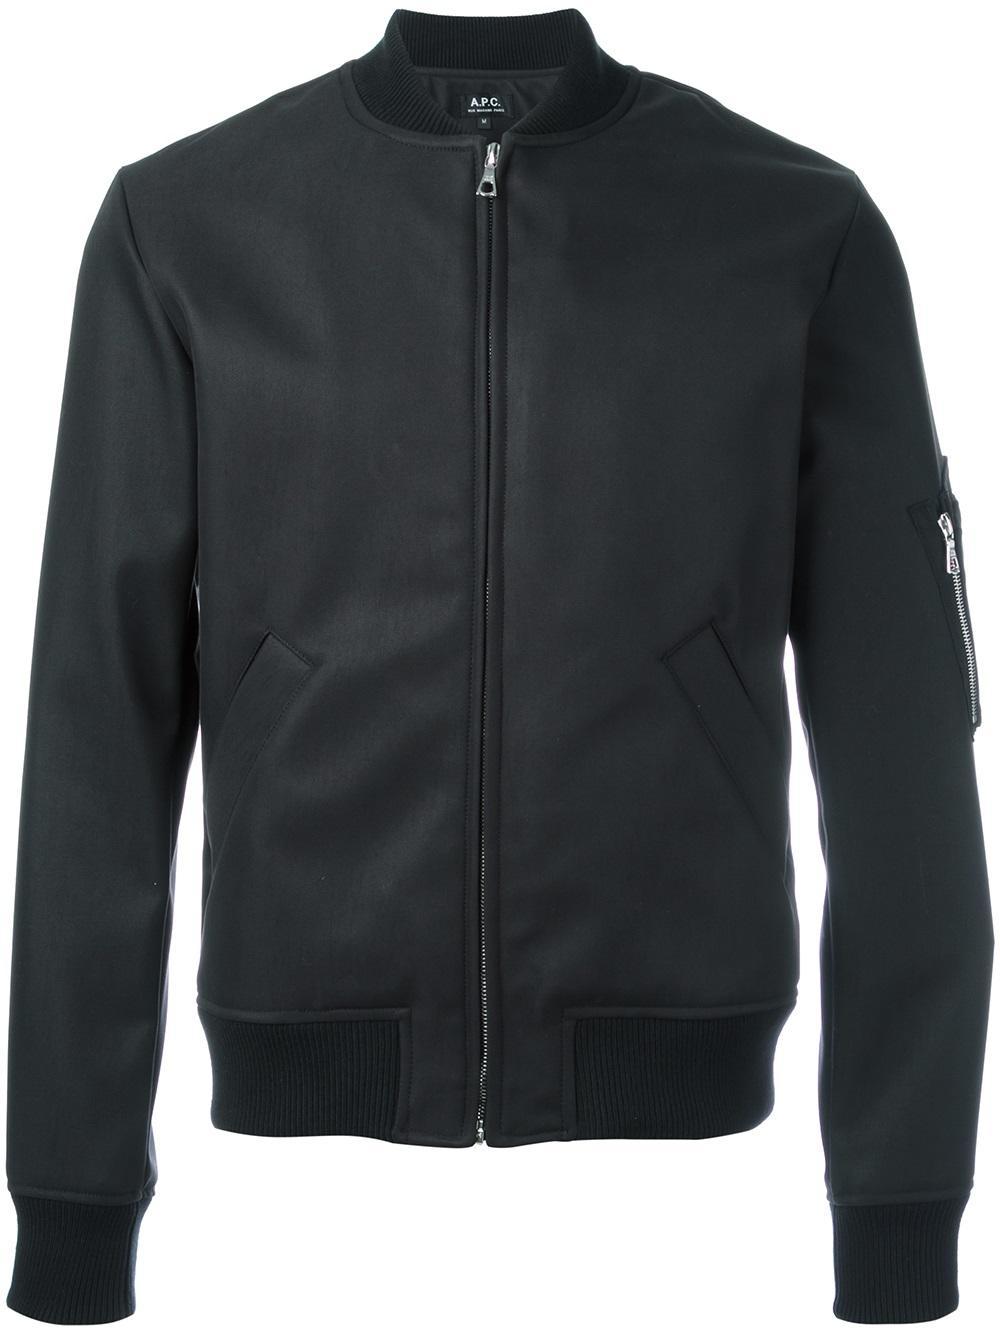 A.P.C. Zipped Bomber Jacket in Black for Men - Lyst